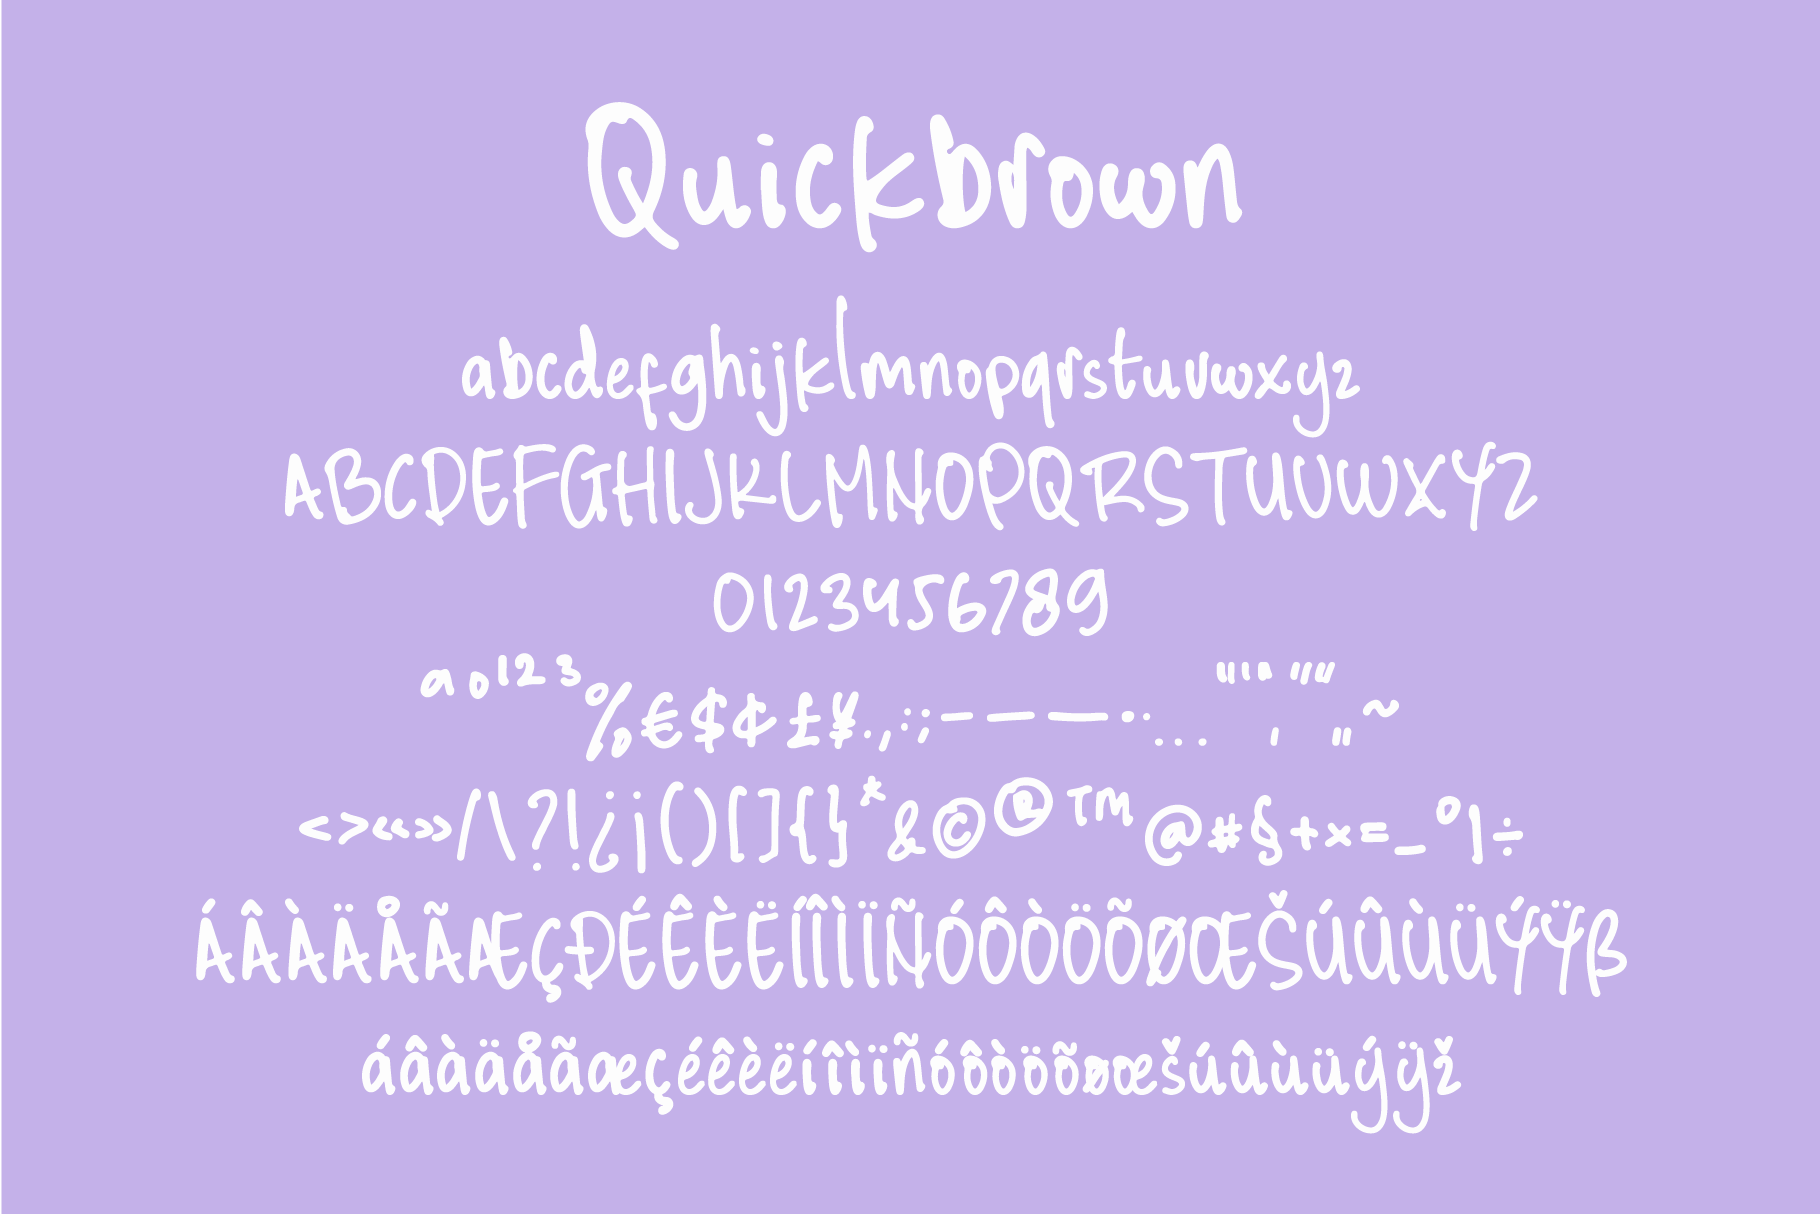 Quickbrown